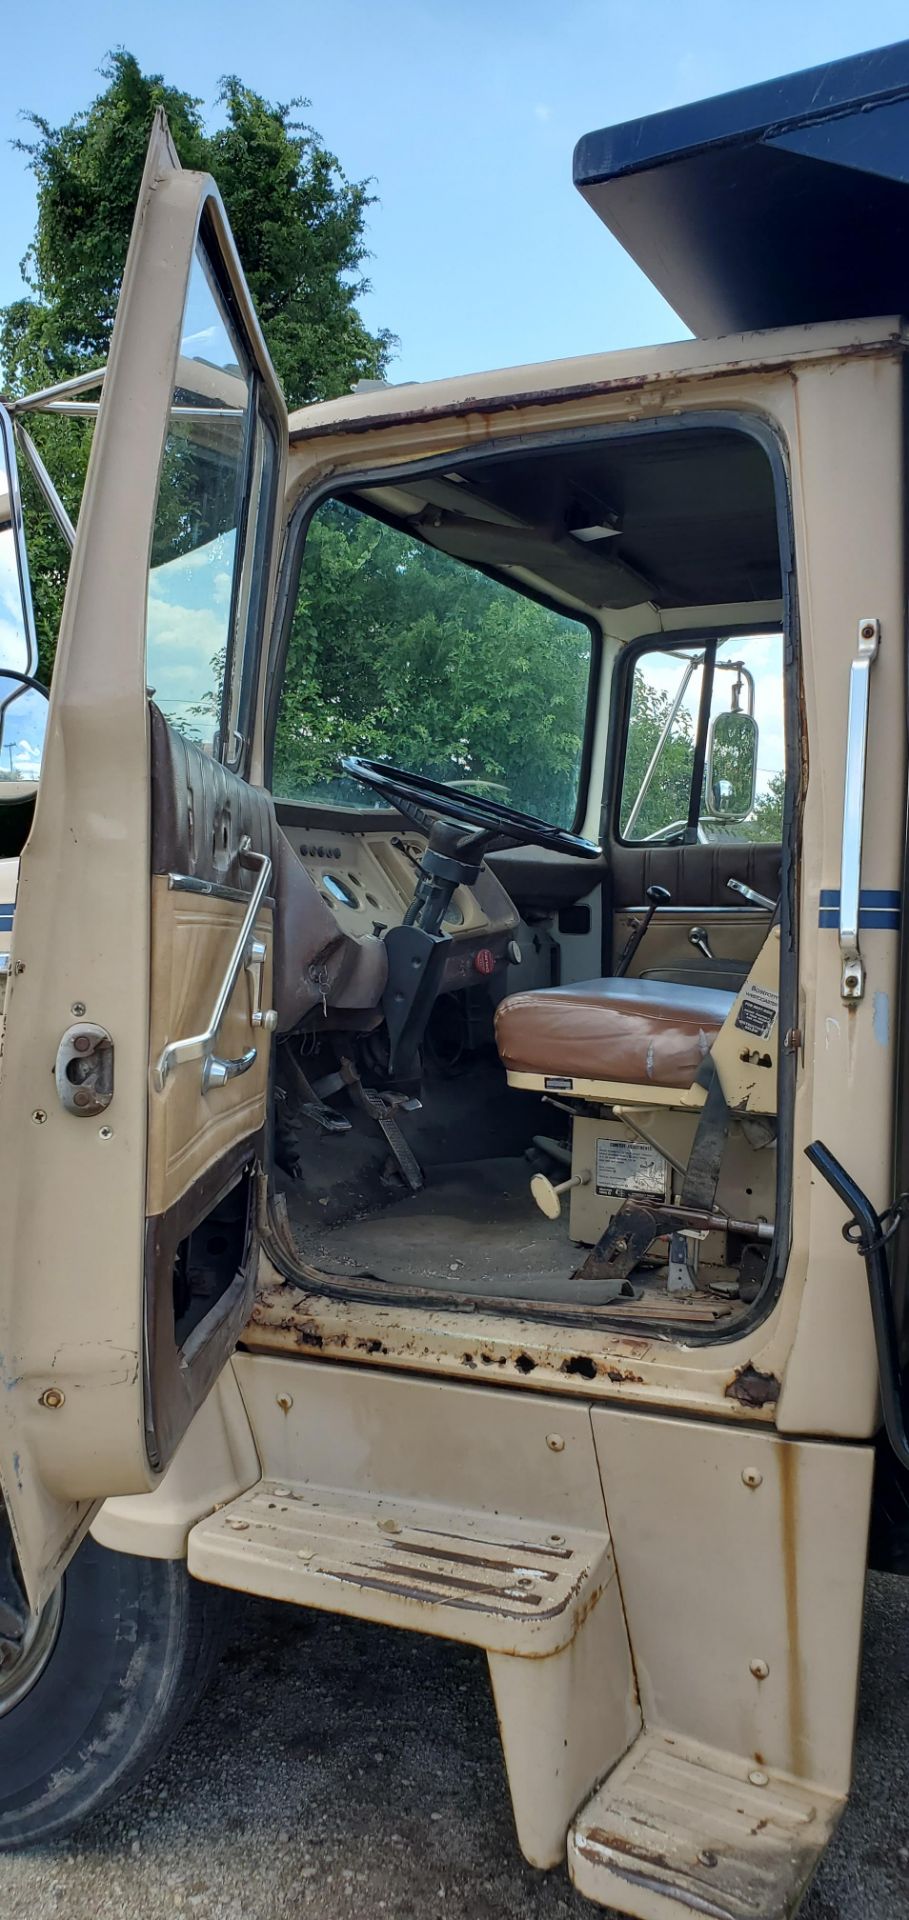 1983 Ford 7000, 5-speed Manual Transmission, Caterpillar 3208 Diesel, 14" Dump Bed,UR 225 Tires, New - Image 7 of 25